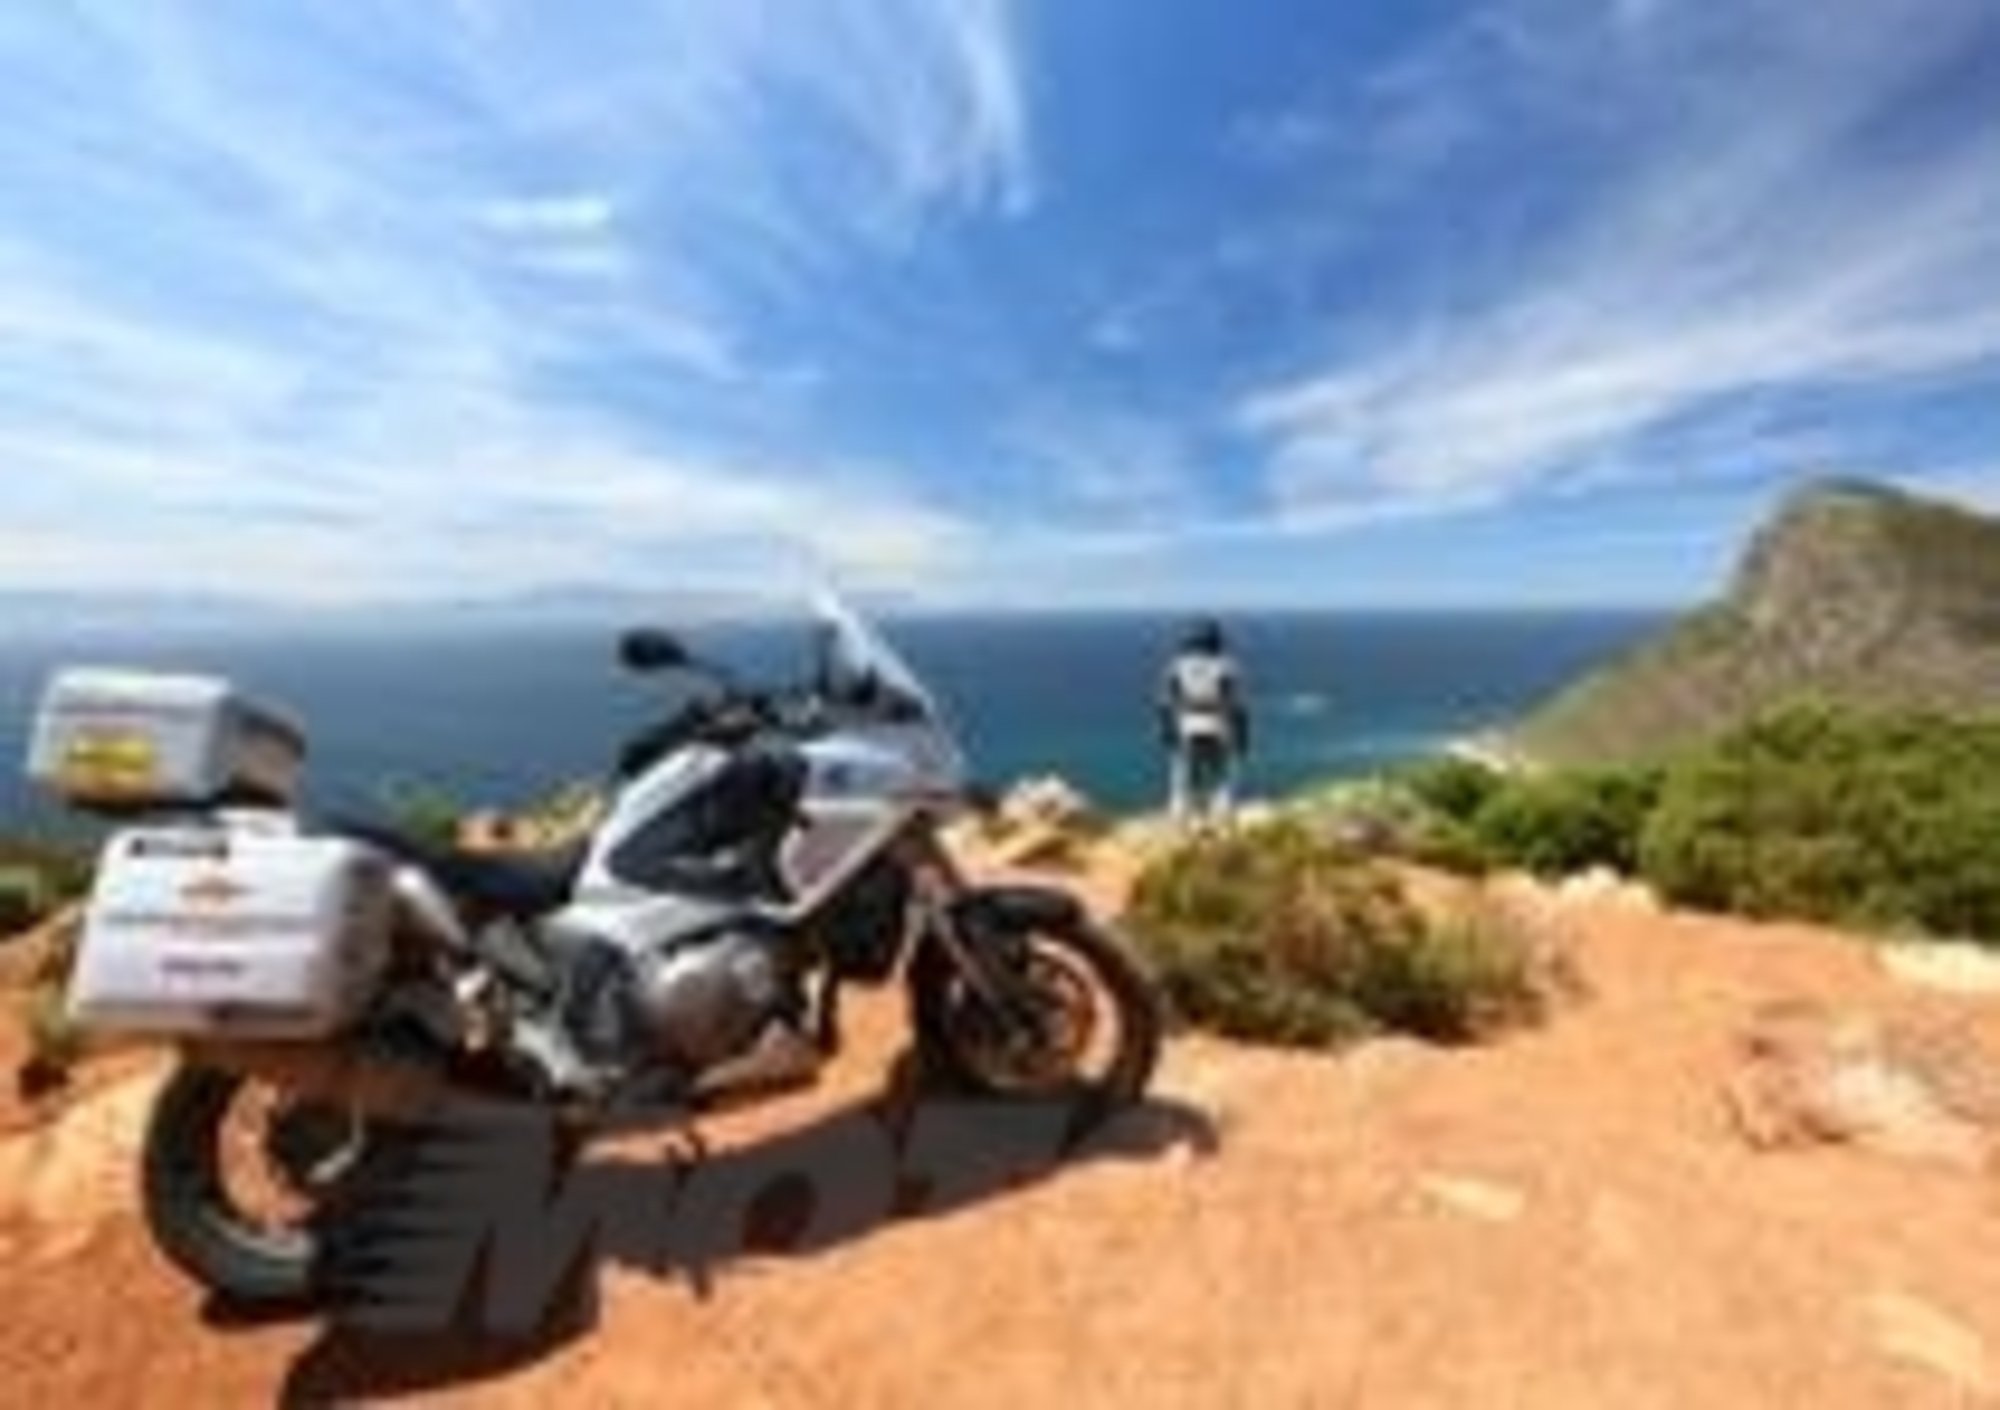 Planet Explorer 2 South Africa. The Best Off